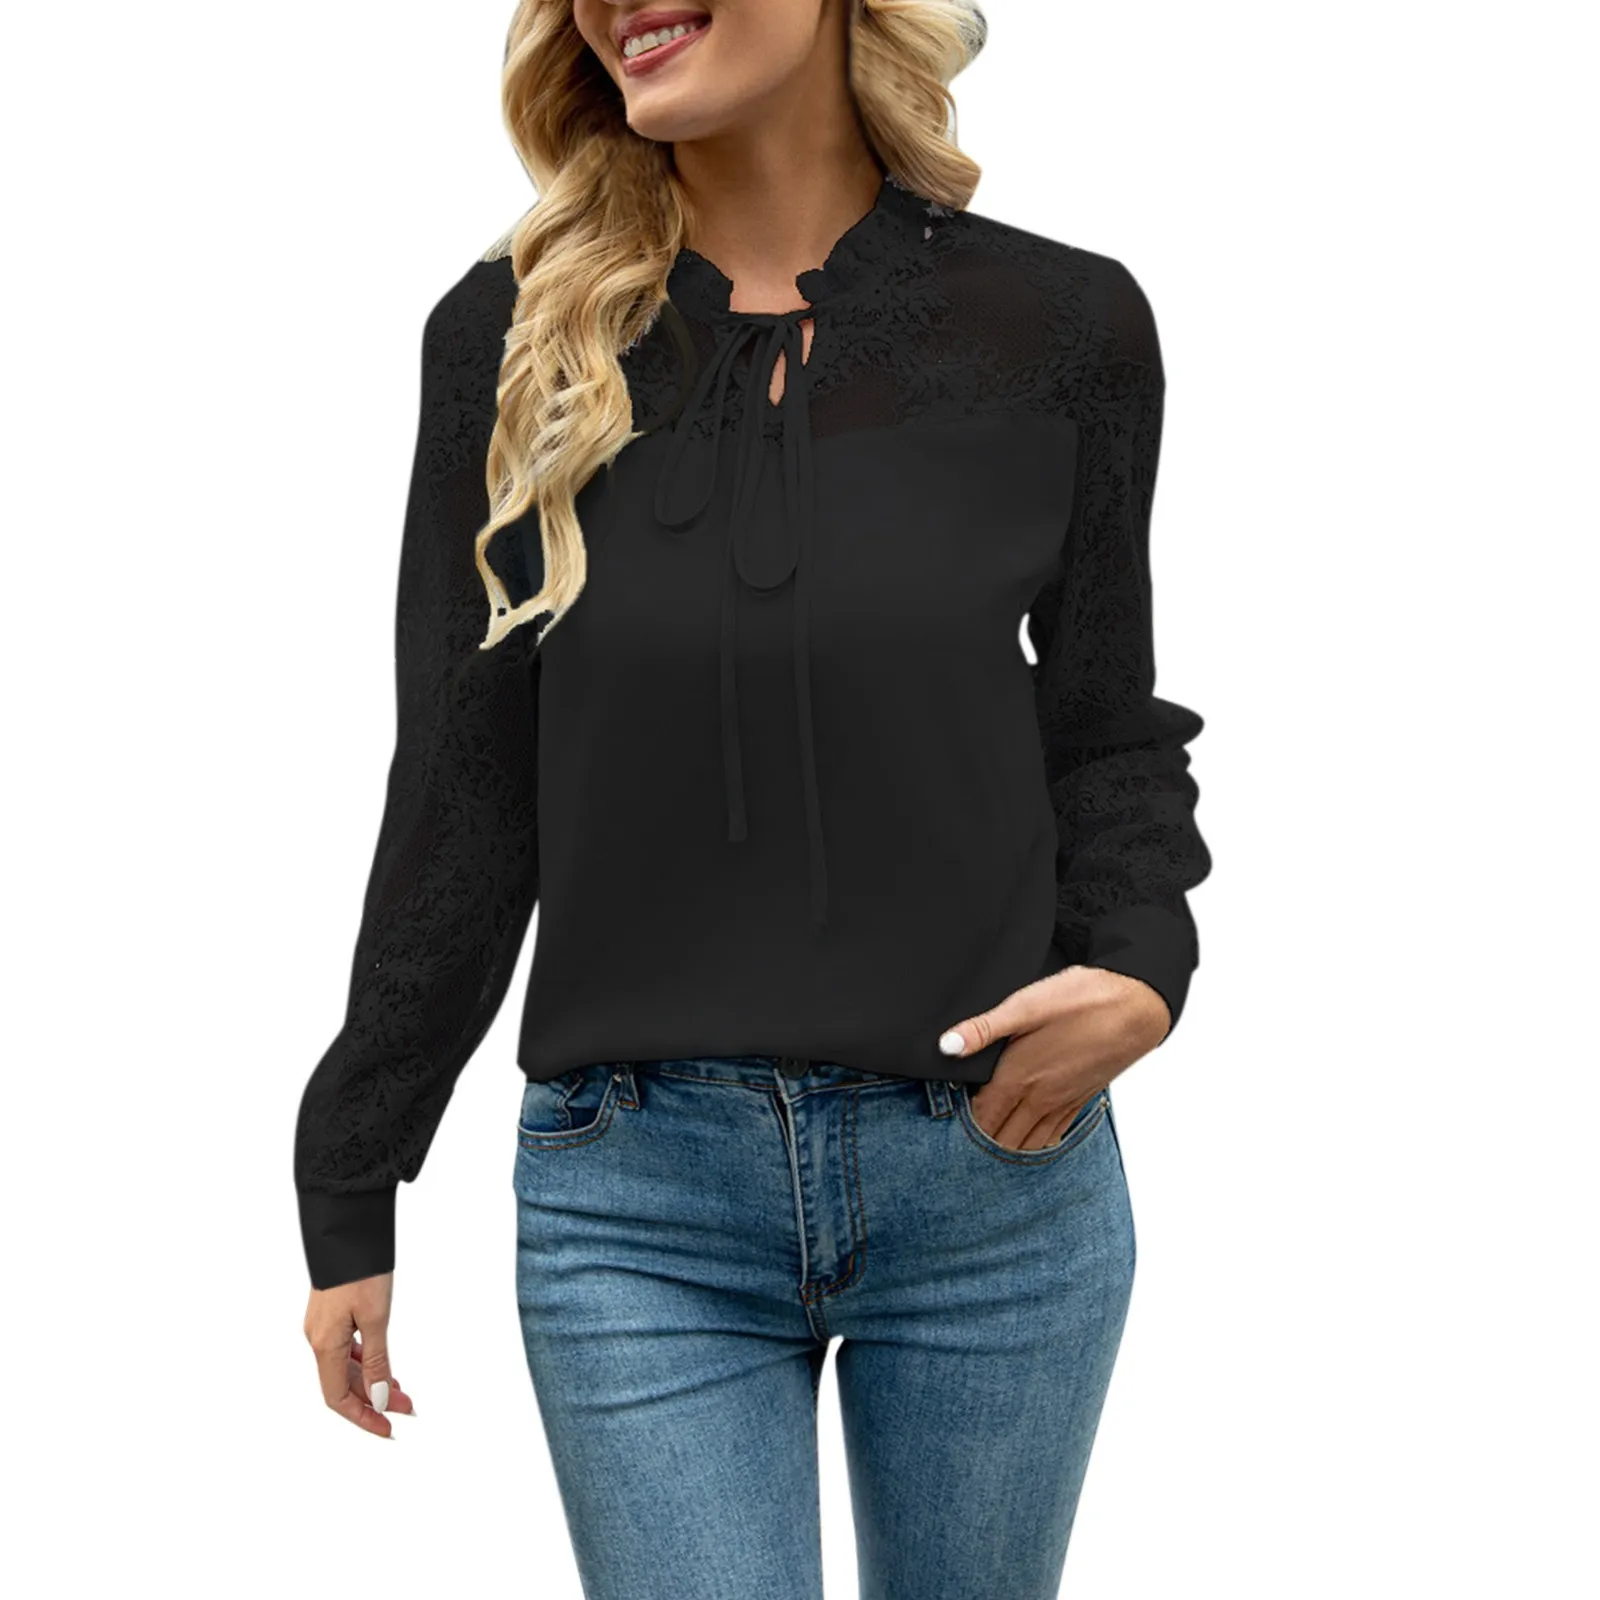 Long Sleeve Shirts for Women,Womens Solid Button Lace Shirts Long-Sleeved Casual Tunic Tops Pullover Tee Shirts Blouses 